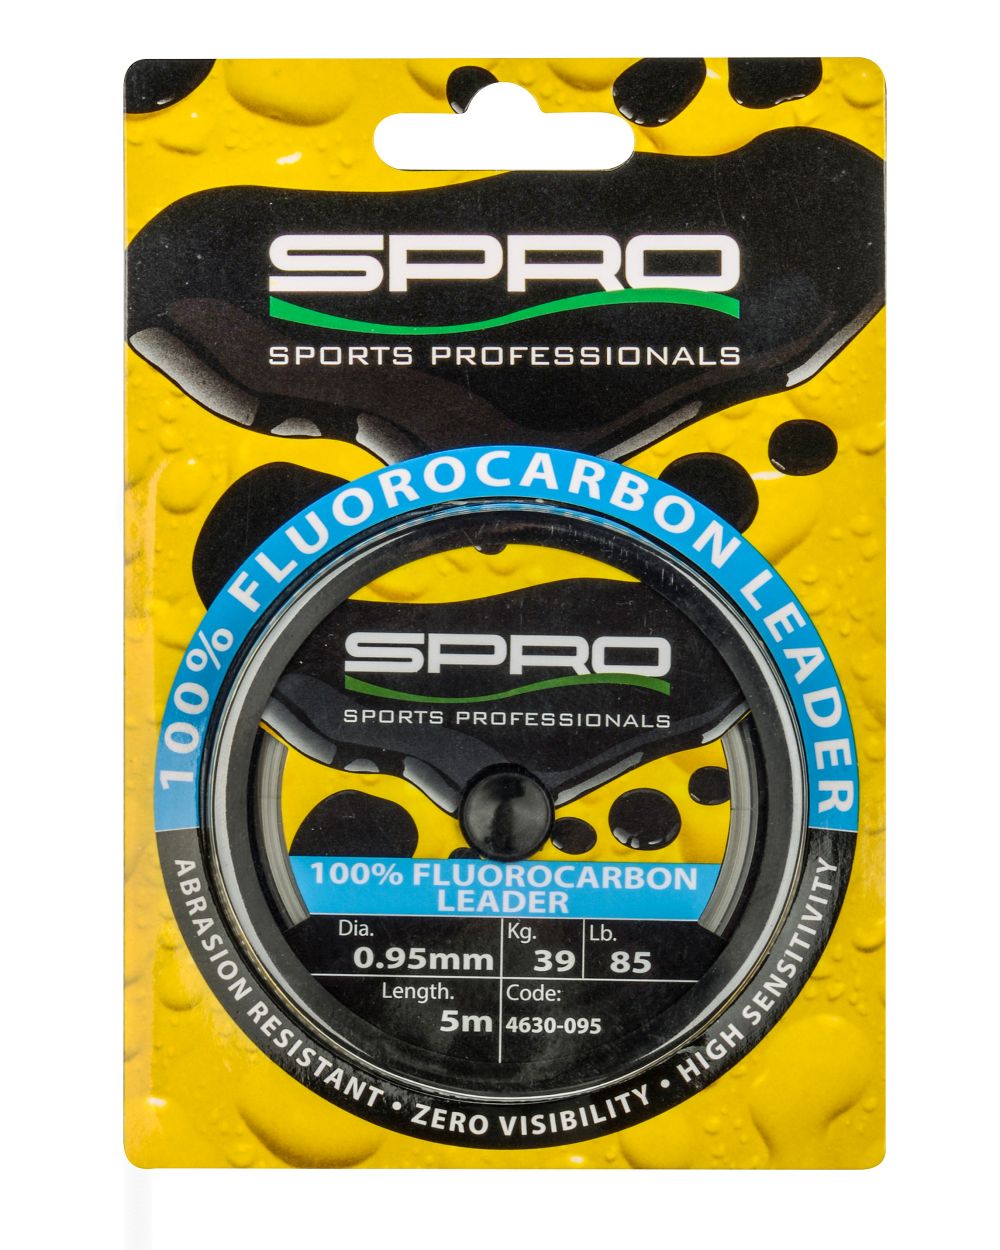 Spro 100% Fluorocarbon 5m Leader Material